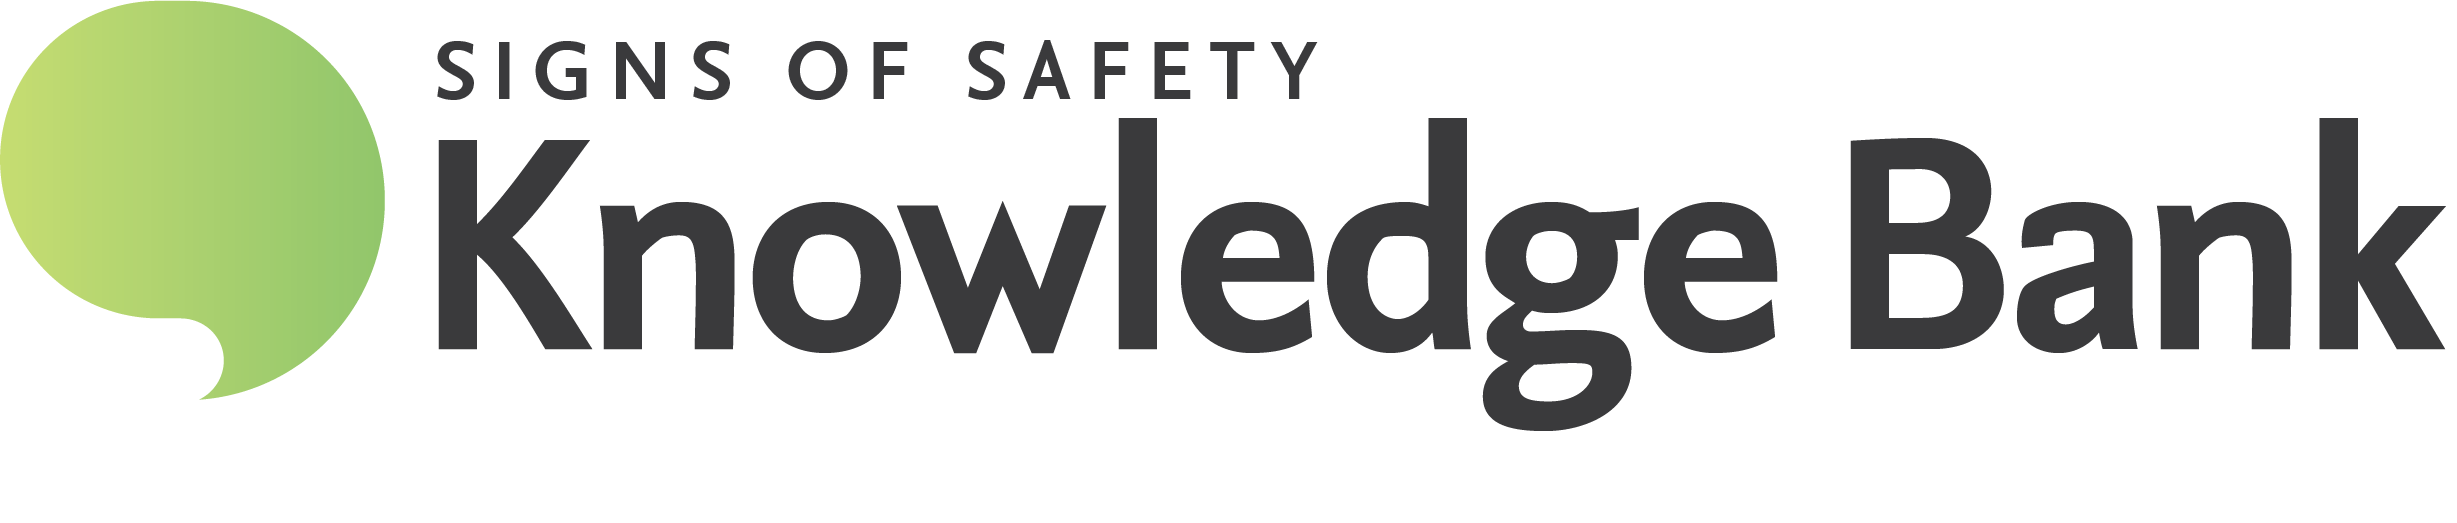 Signs of Safety Knowledge Bank logo